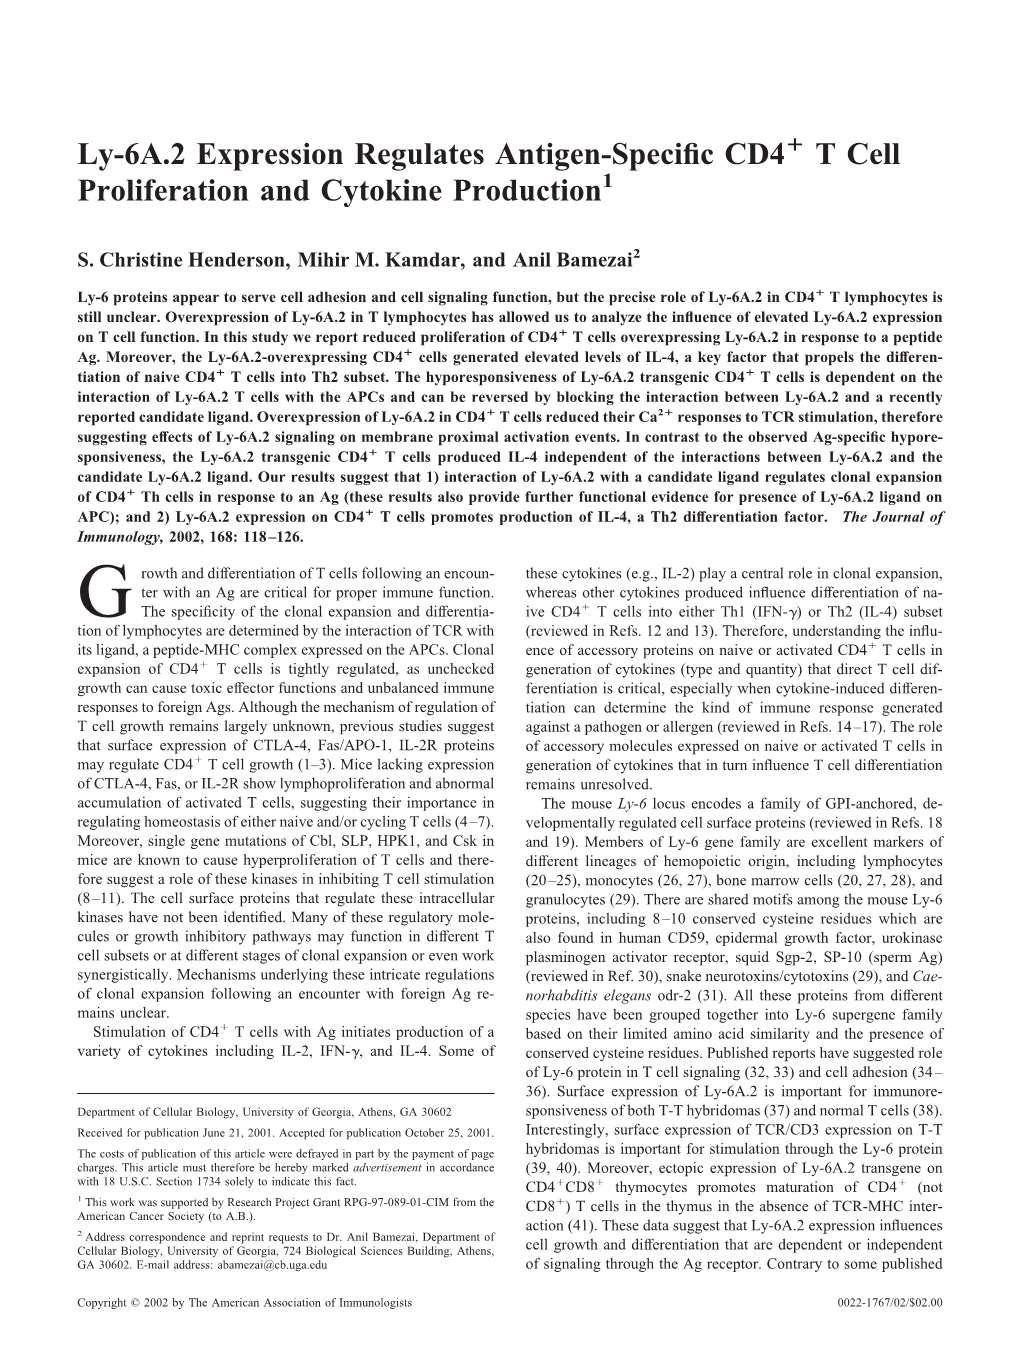 And Cytokine Production T Cell Proliferation + Antigen-Specific